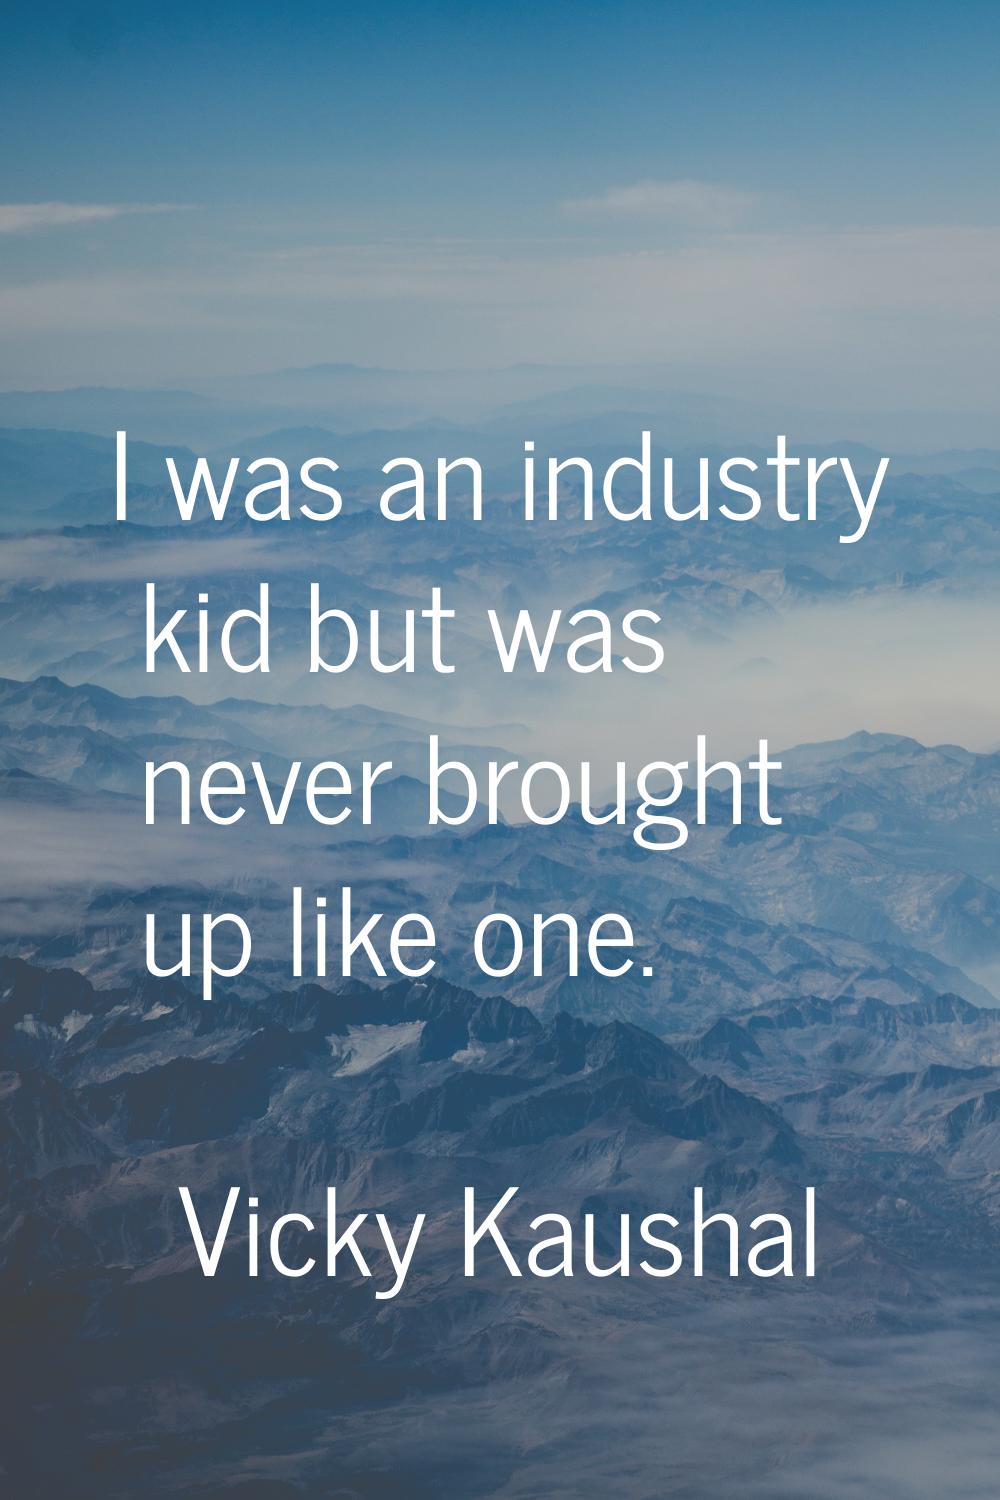 I was an industry kid but was never brought up like one.